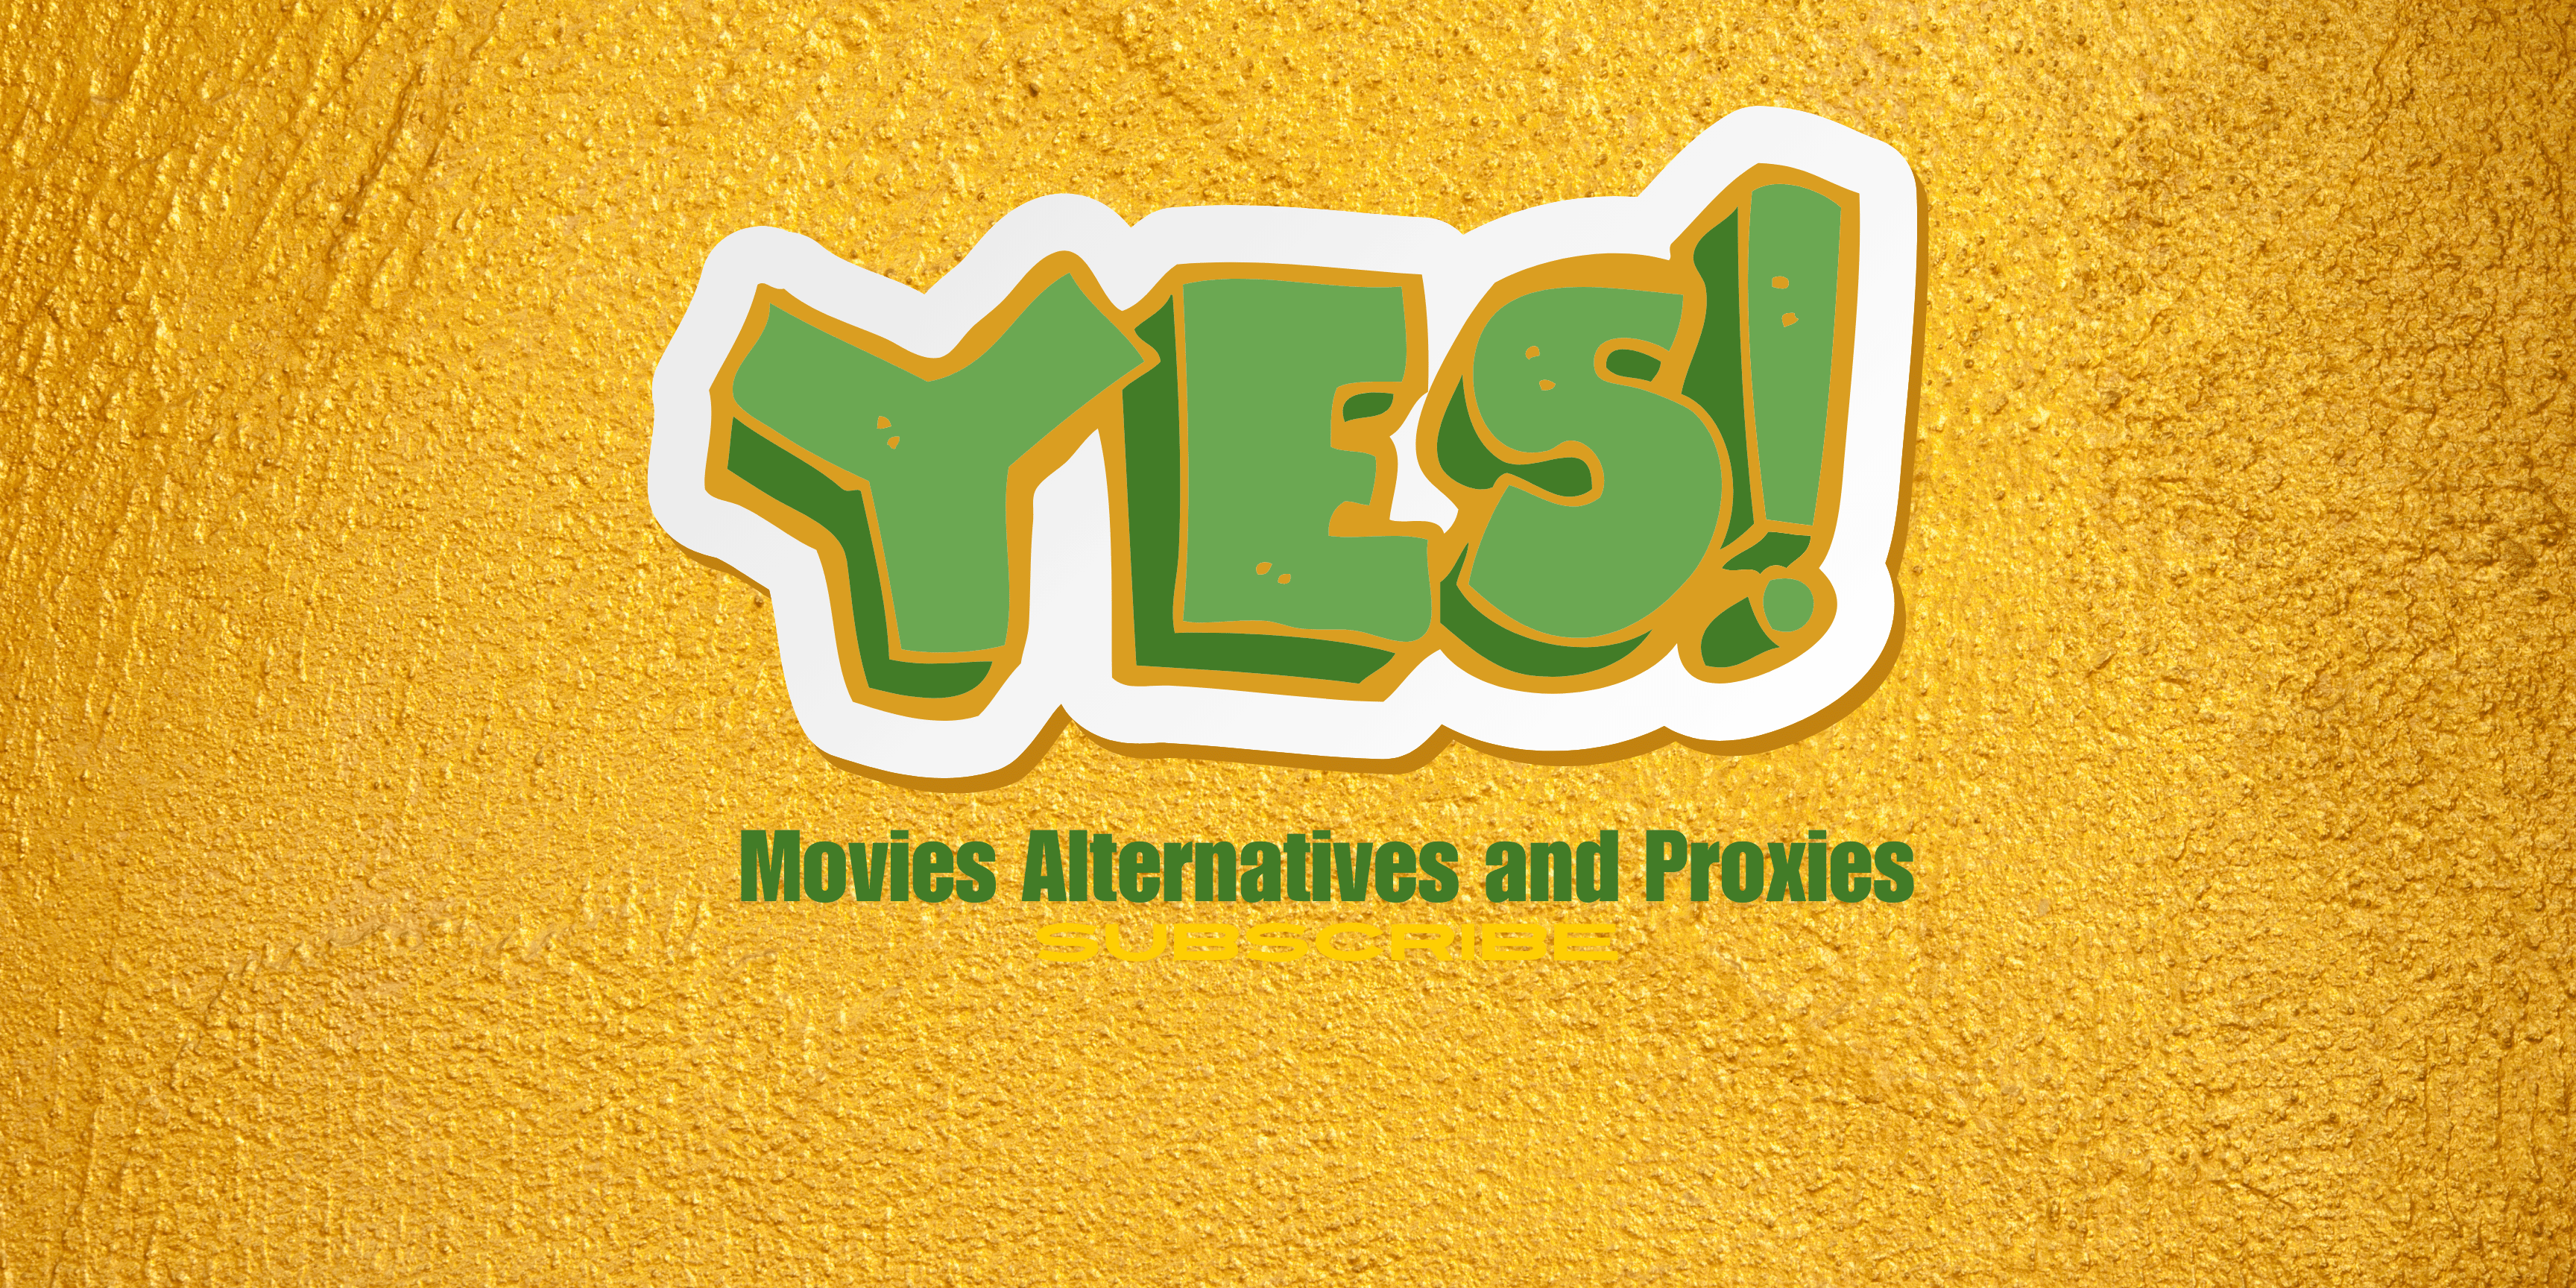 Yesmovies alternatives and proxies